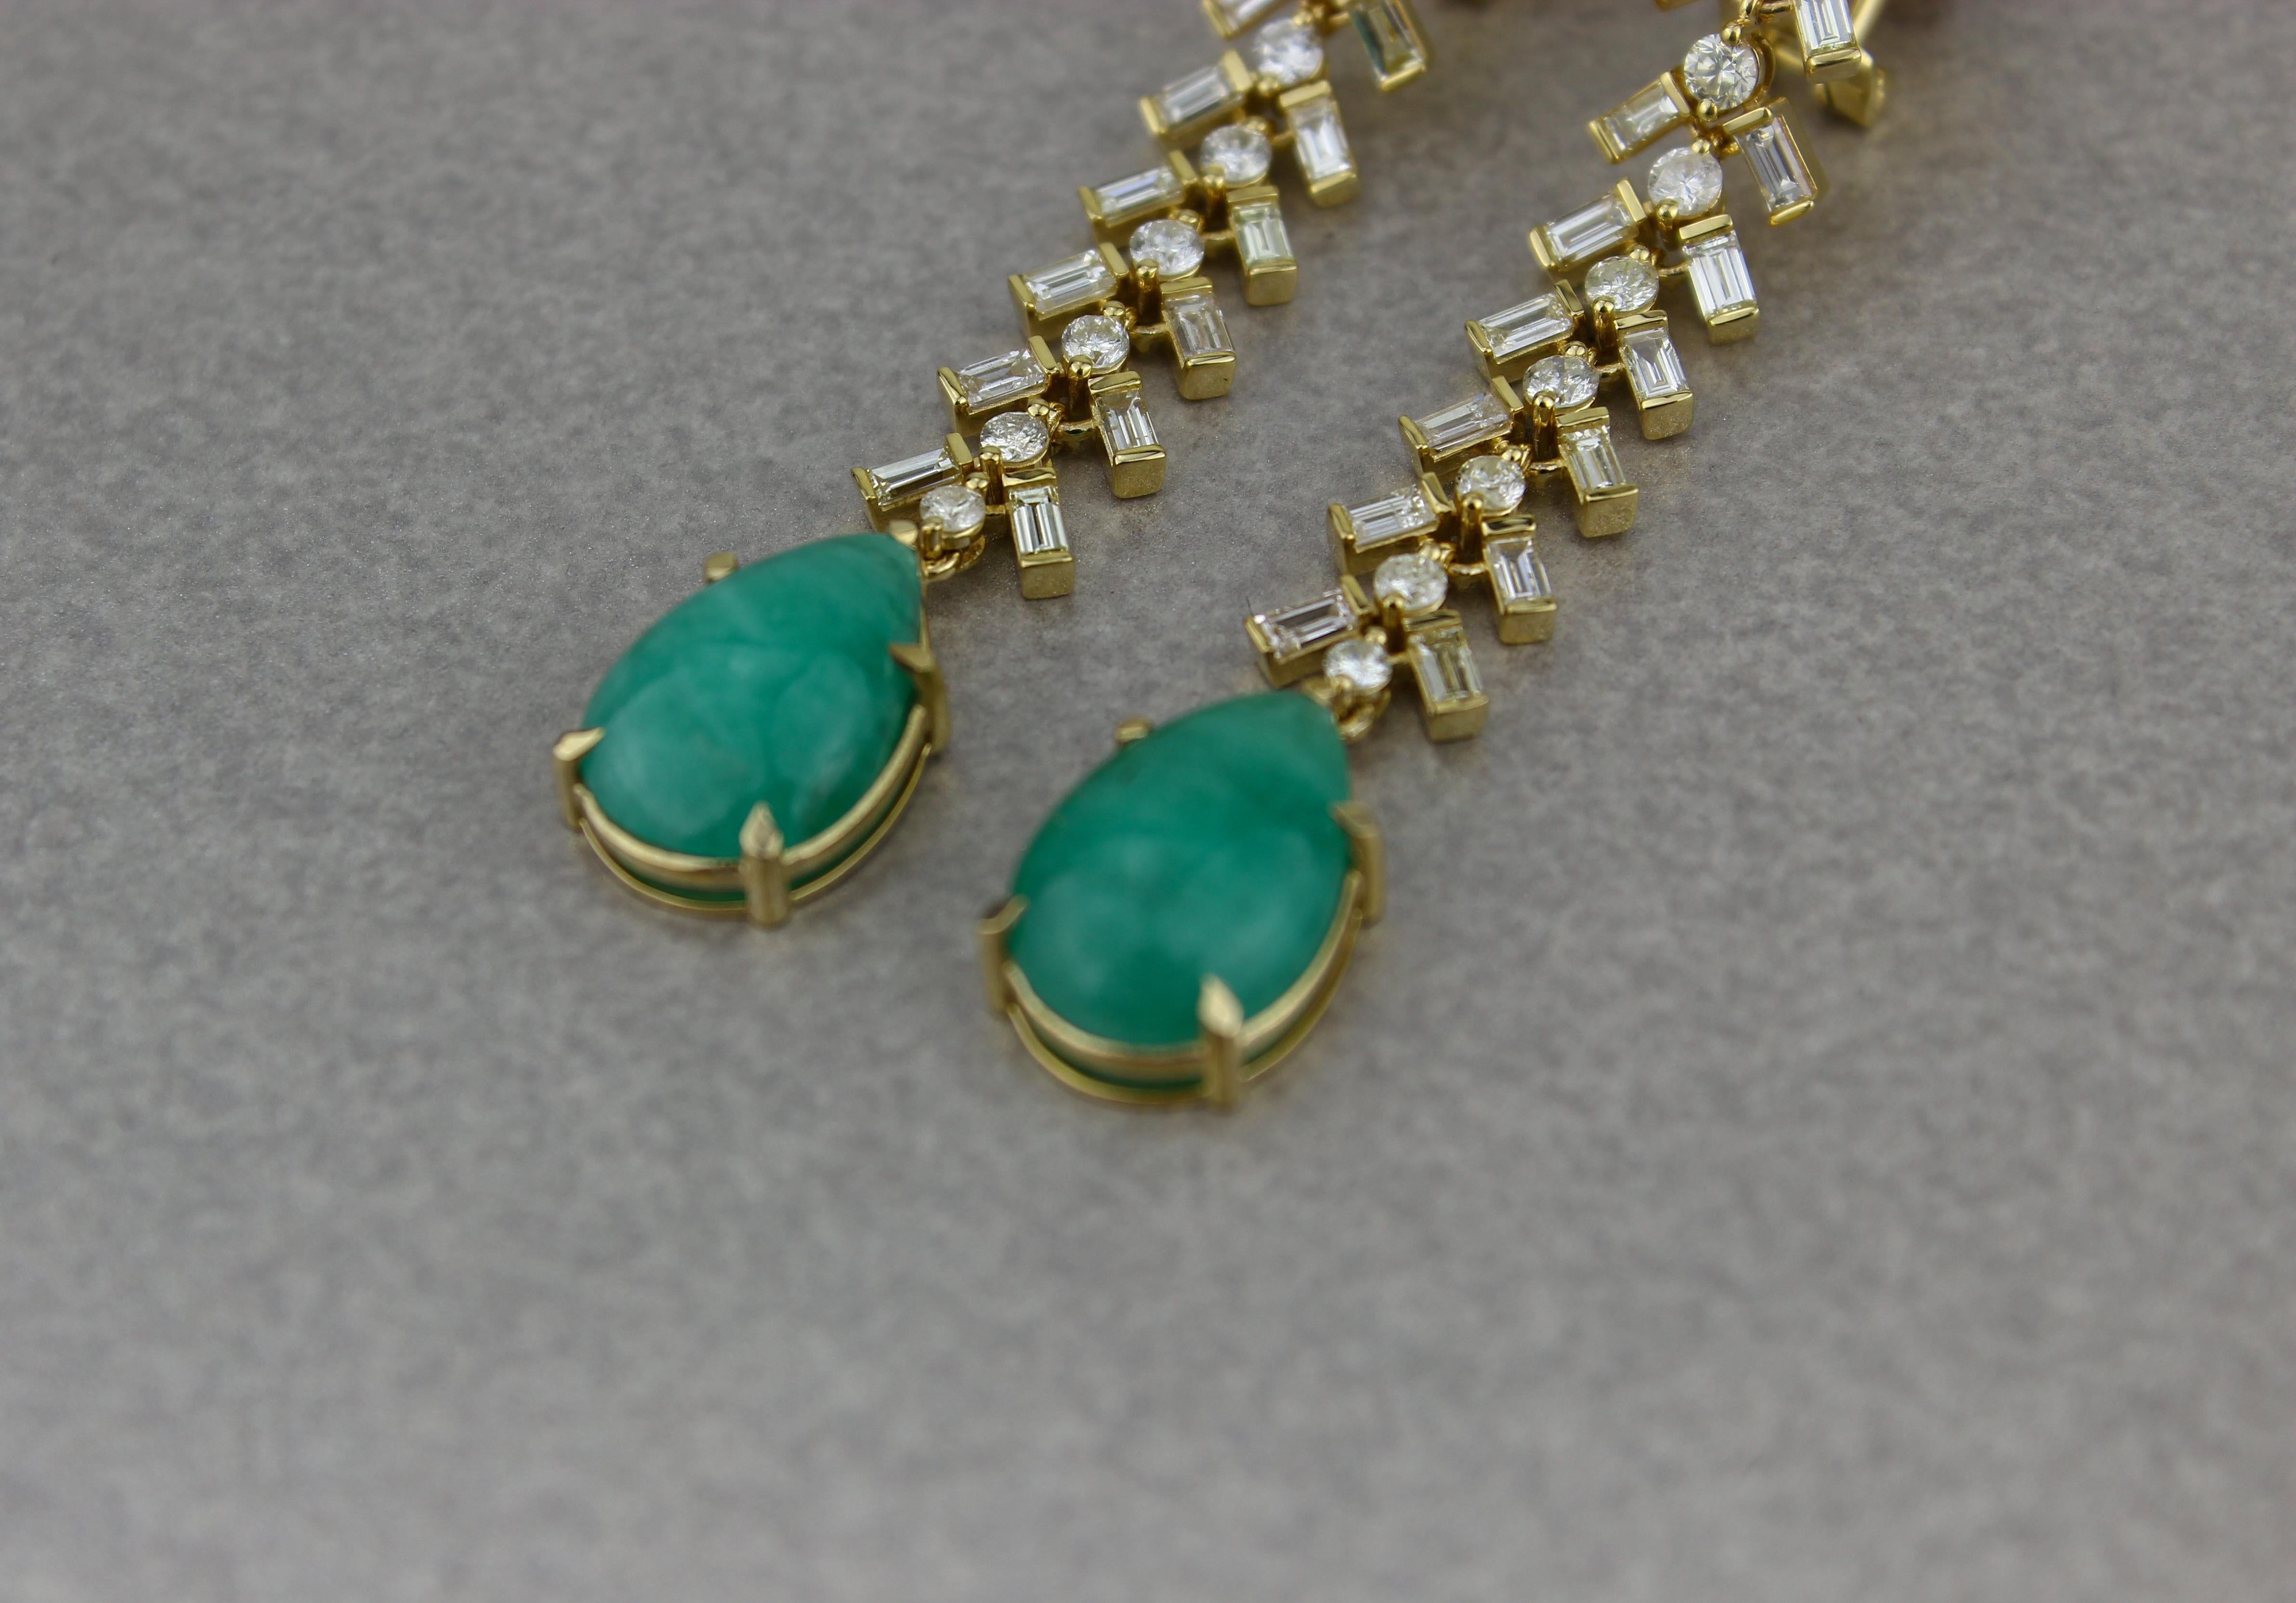 Tear Drop Emerald Gemstone and Diamond Earrings in 18k Solid Gold For Sale 1